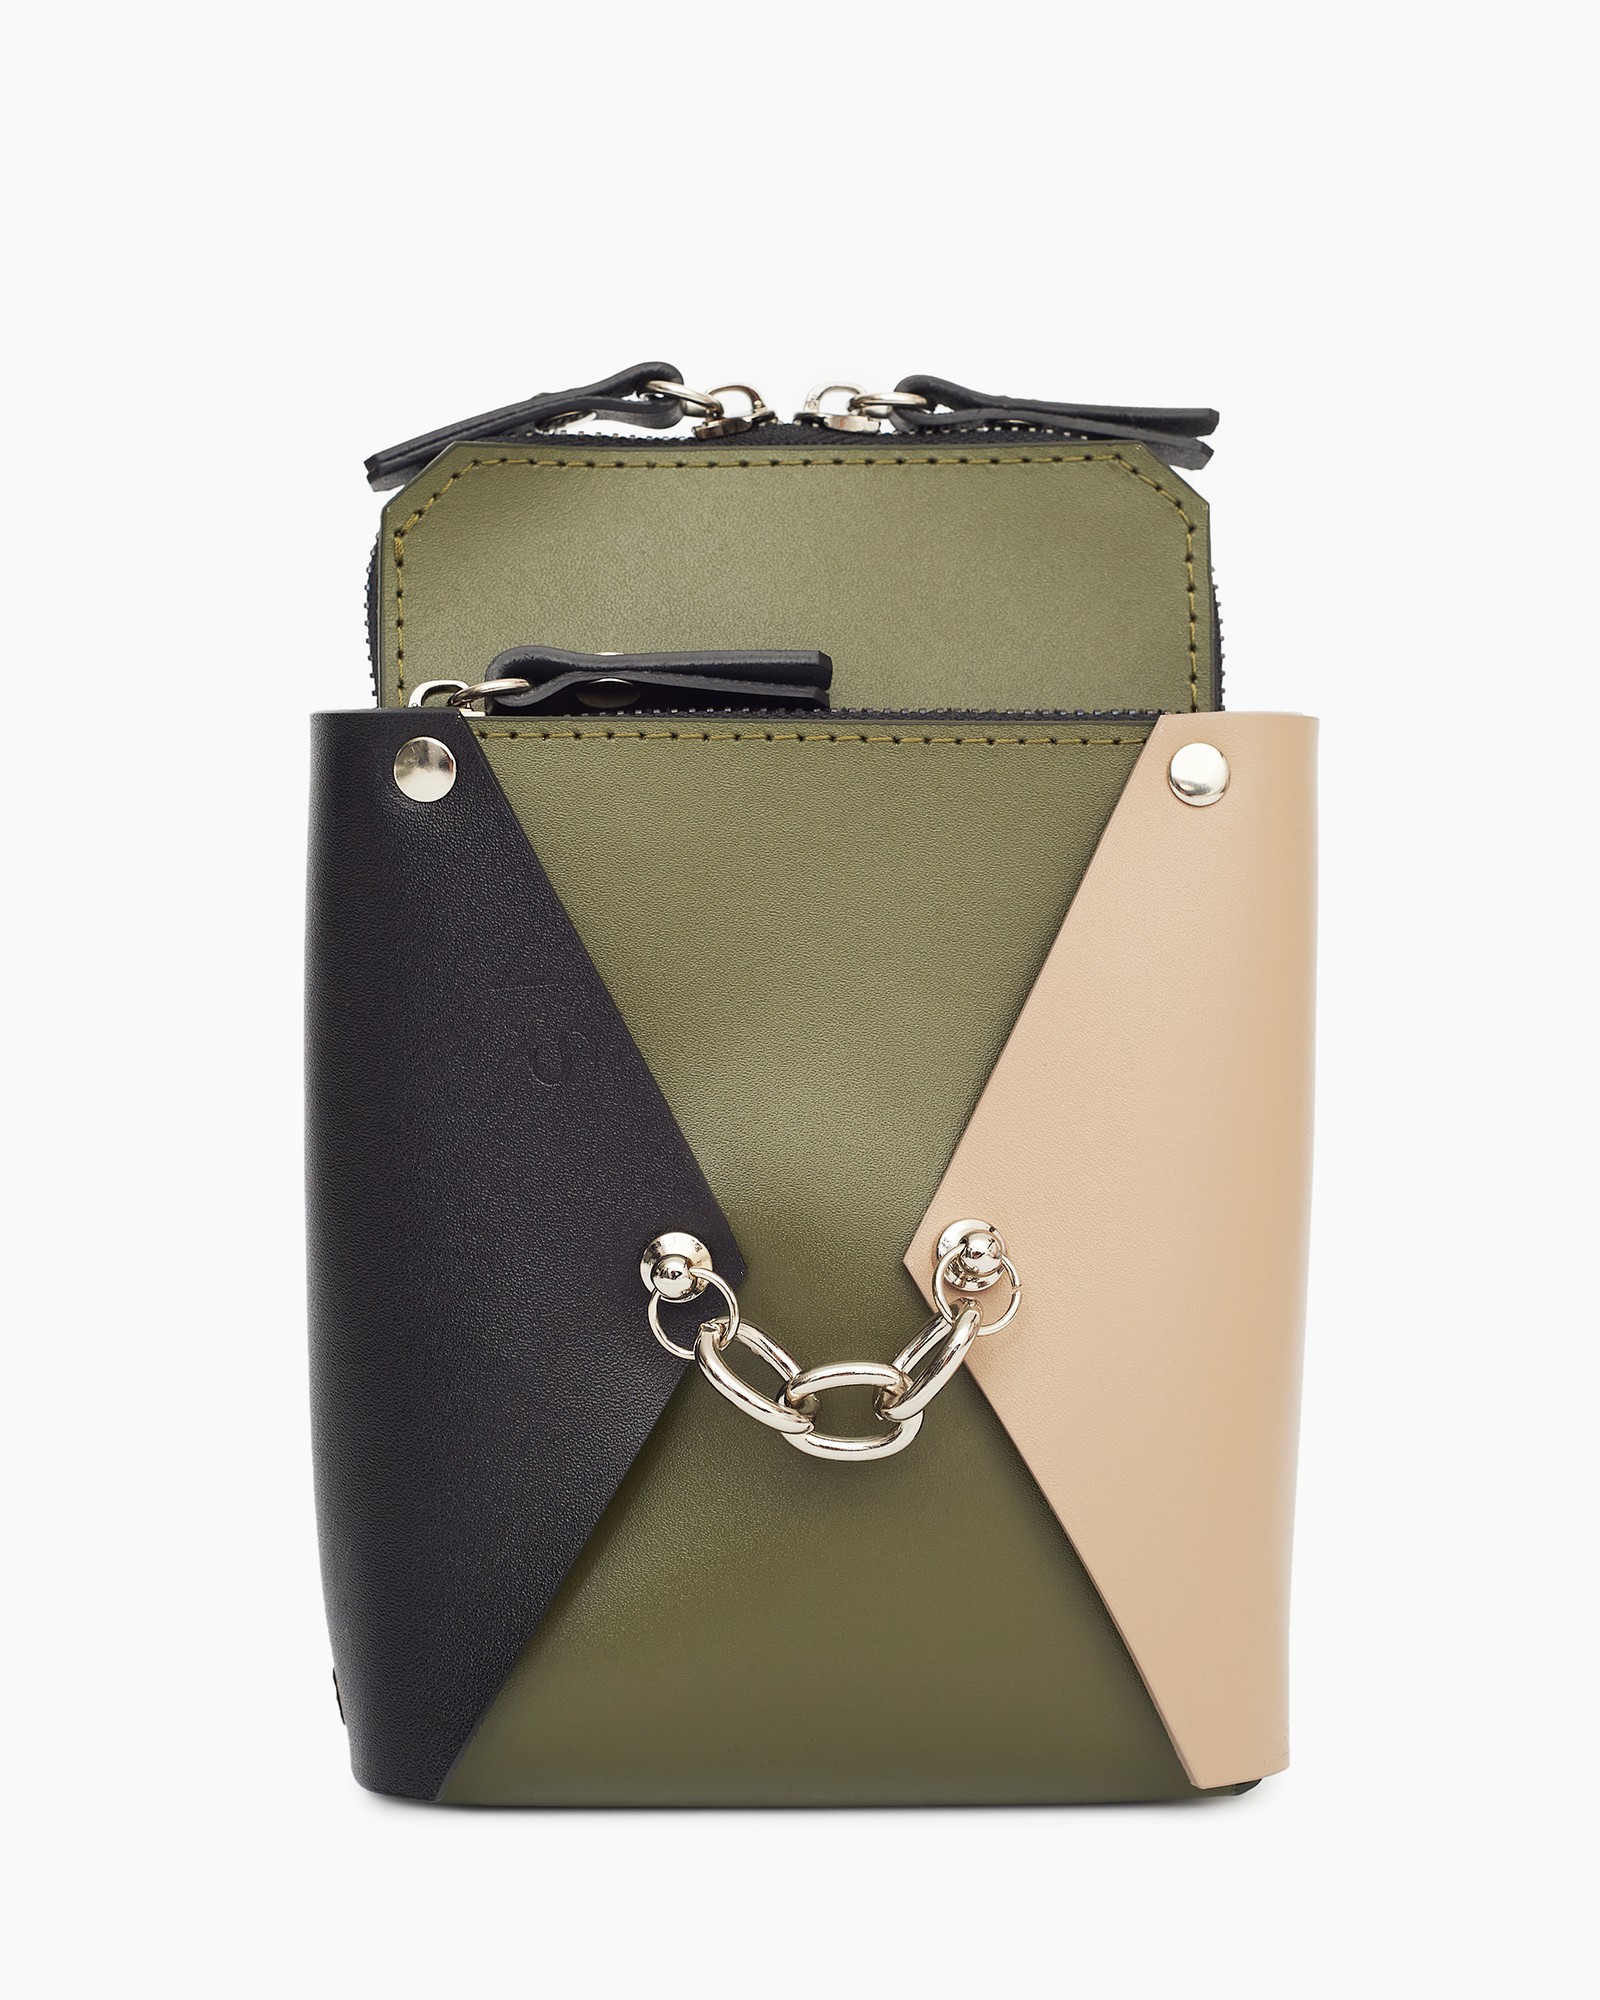 Talia leather bag in olive, beige and black color